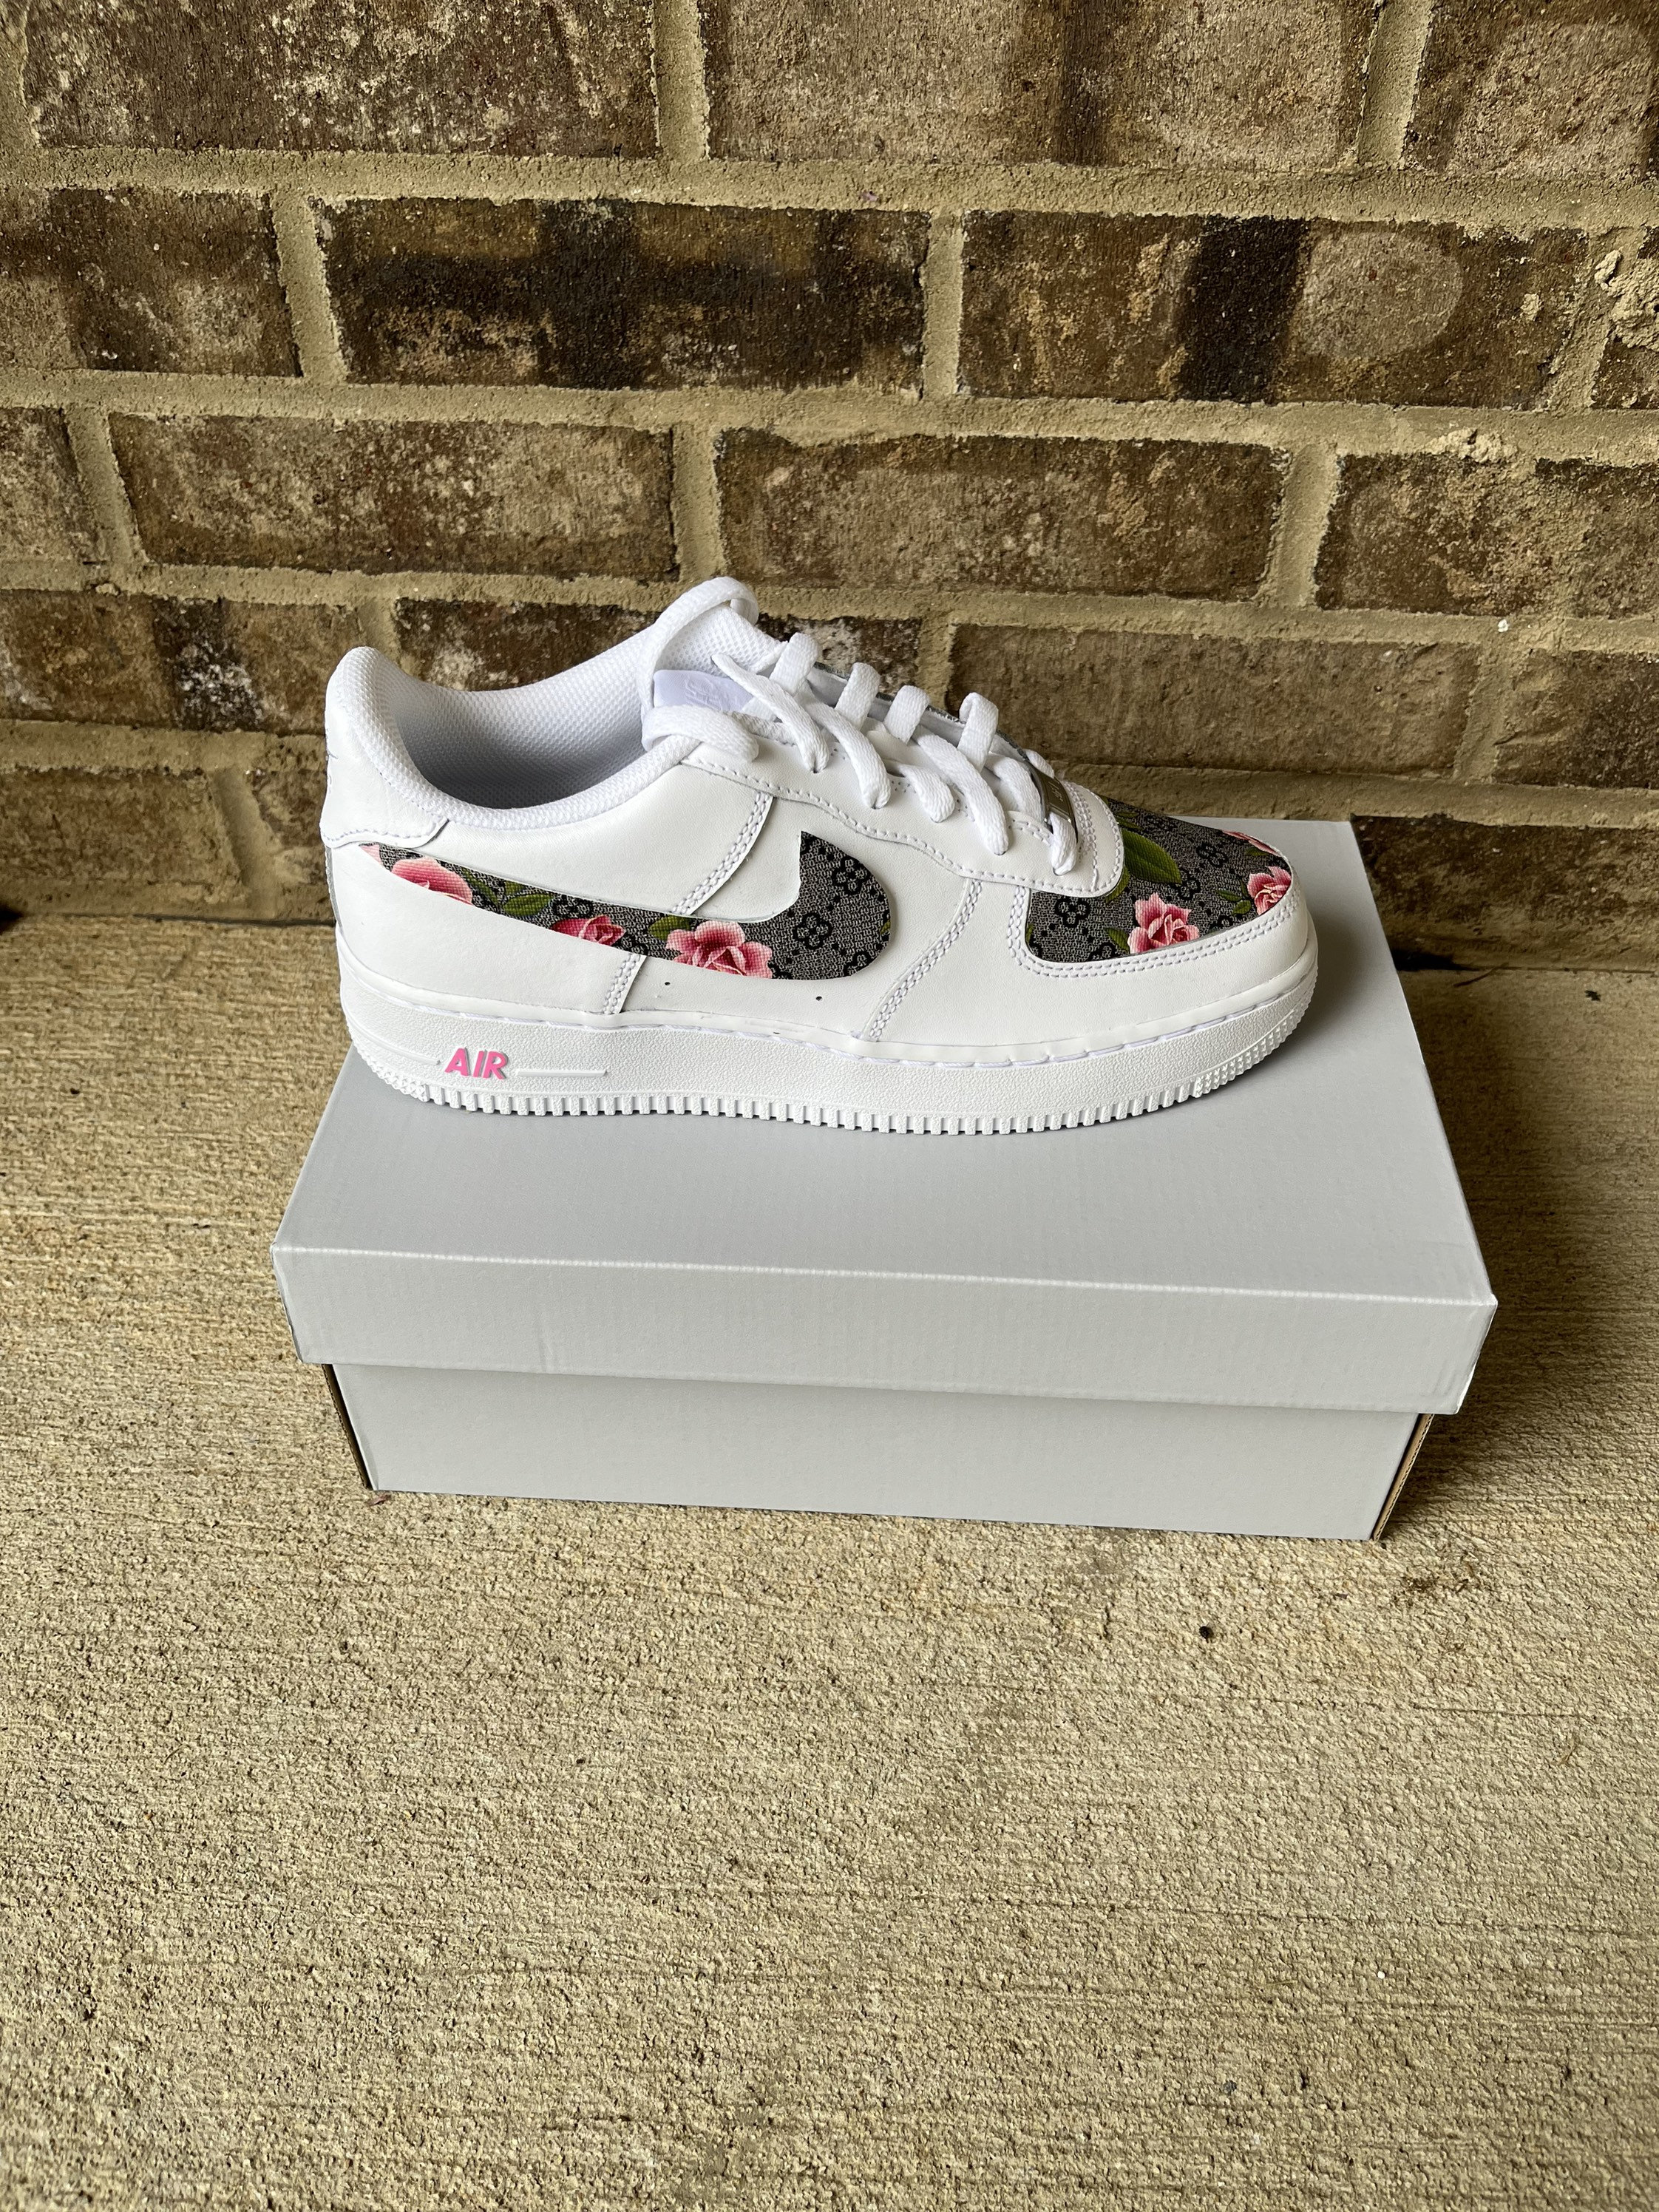 Insatisfactorio Imposible Cuna Nike Air Force 1 Gucci - Etsy